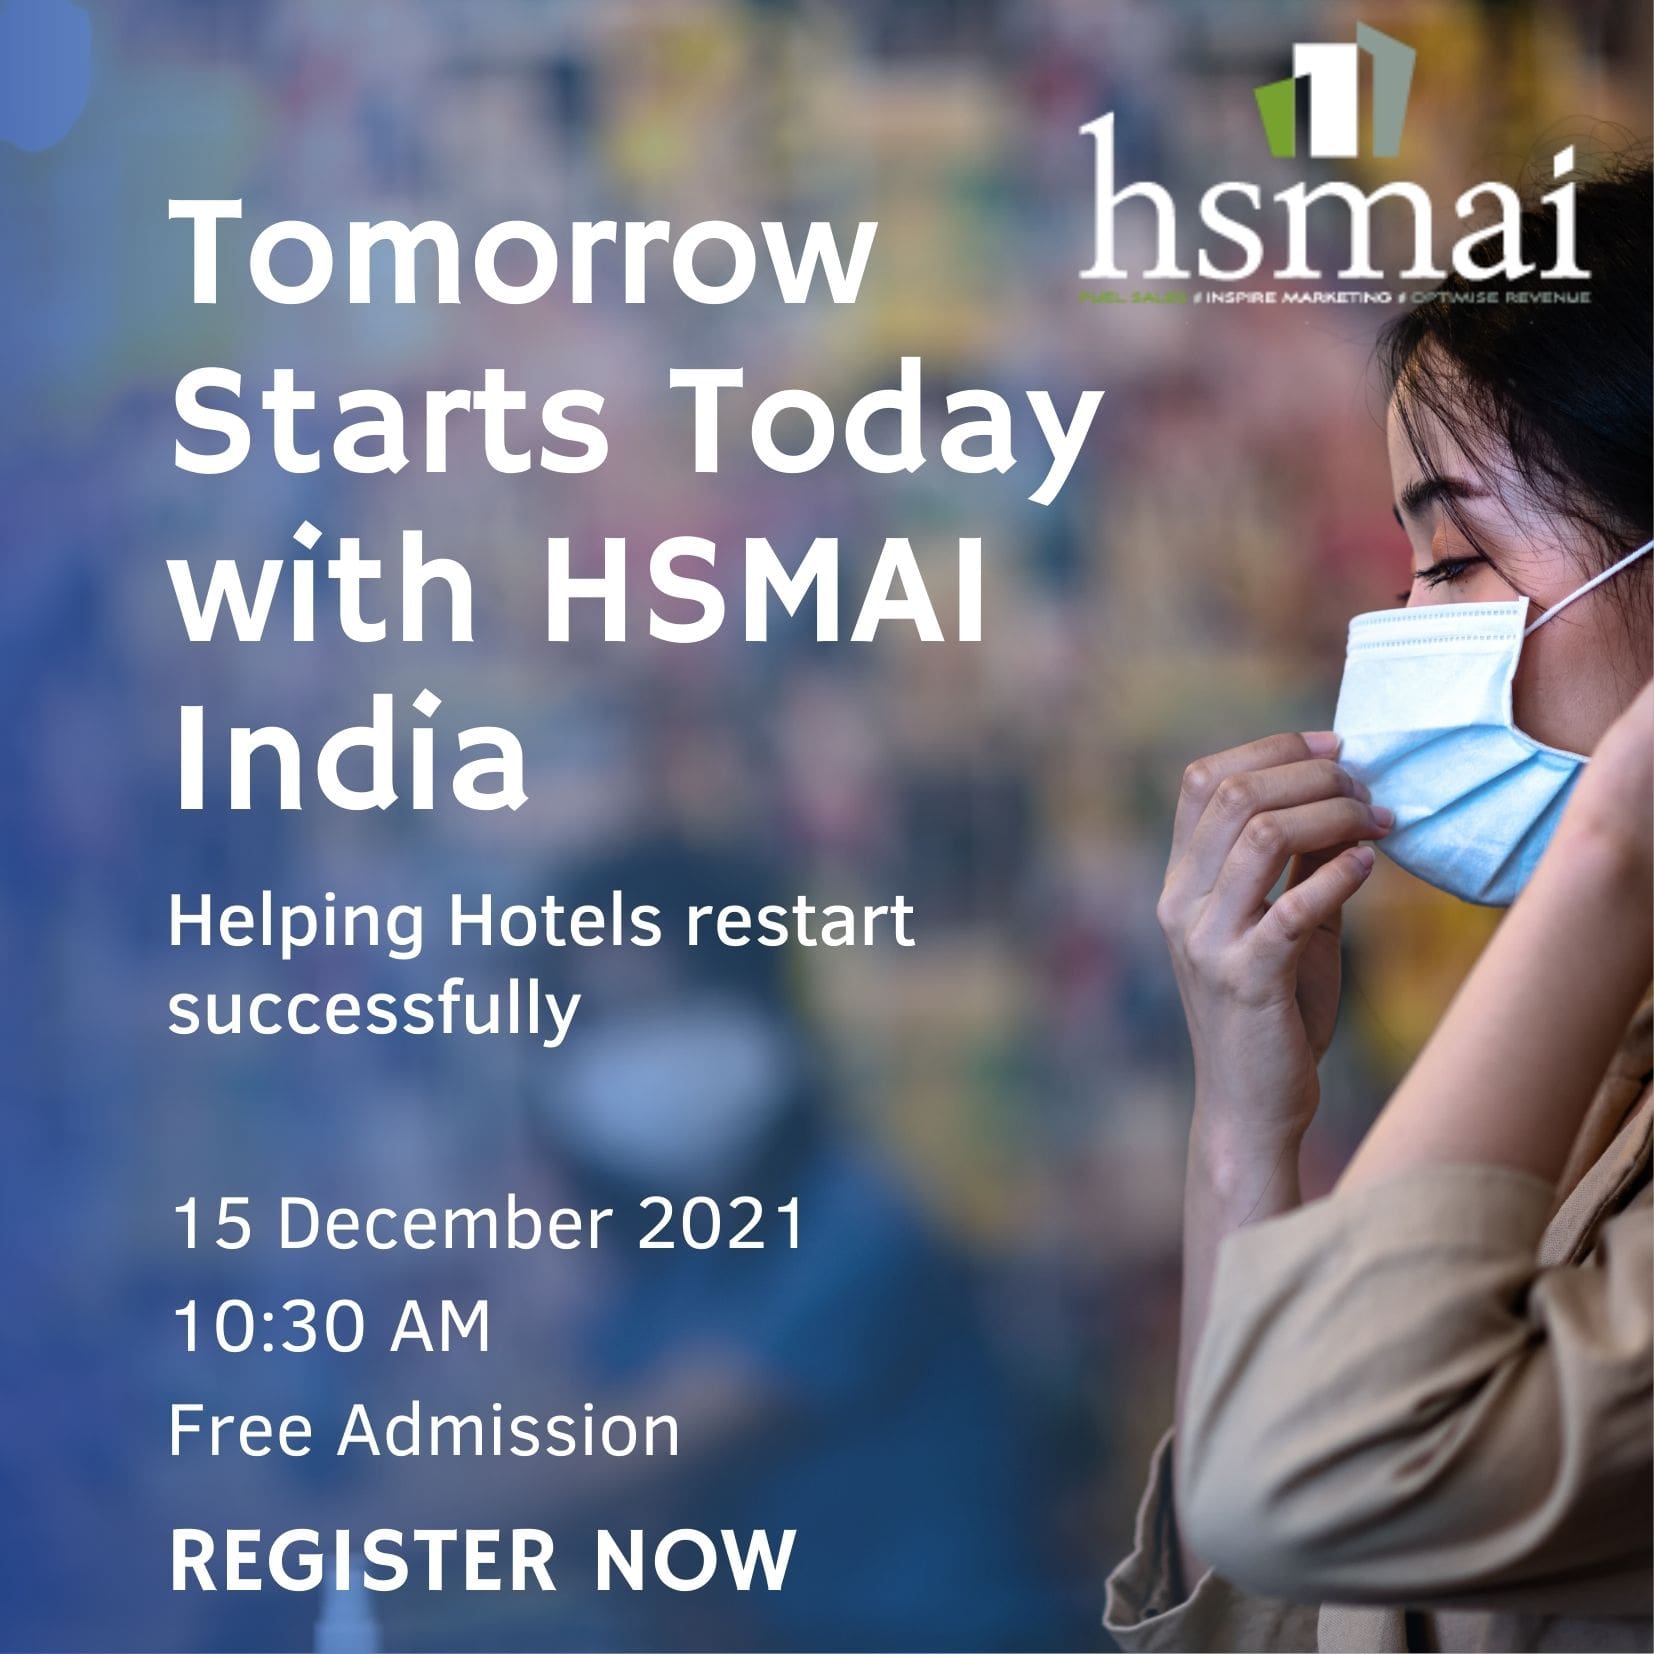 “Tomorrow Starts Today” with HSMAI India